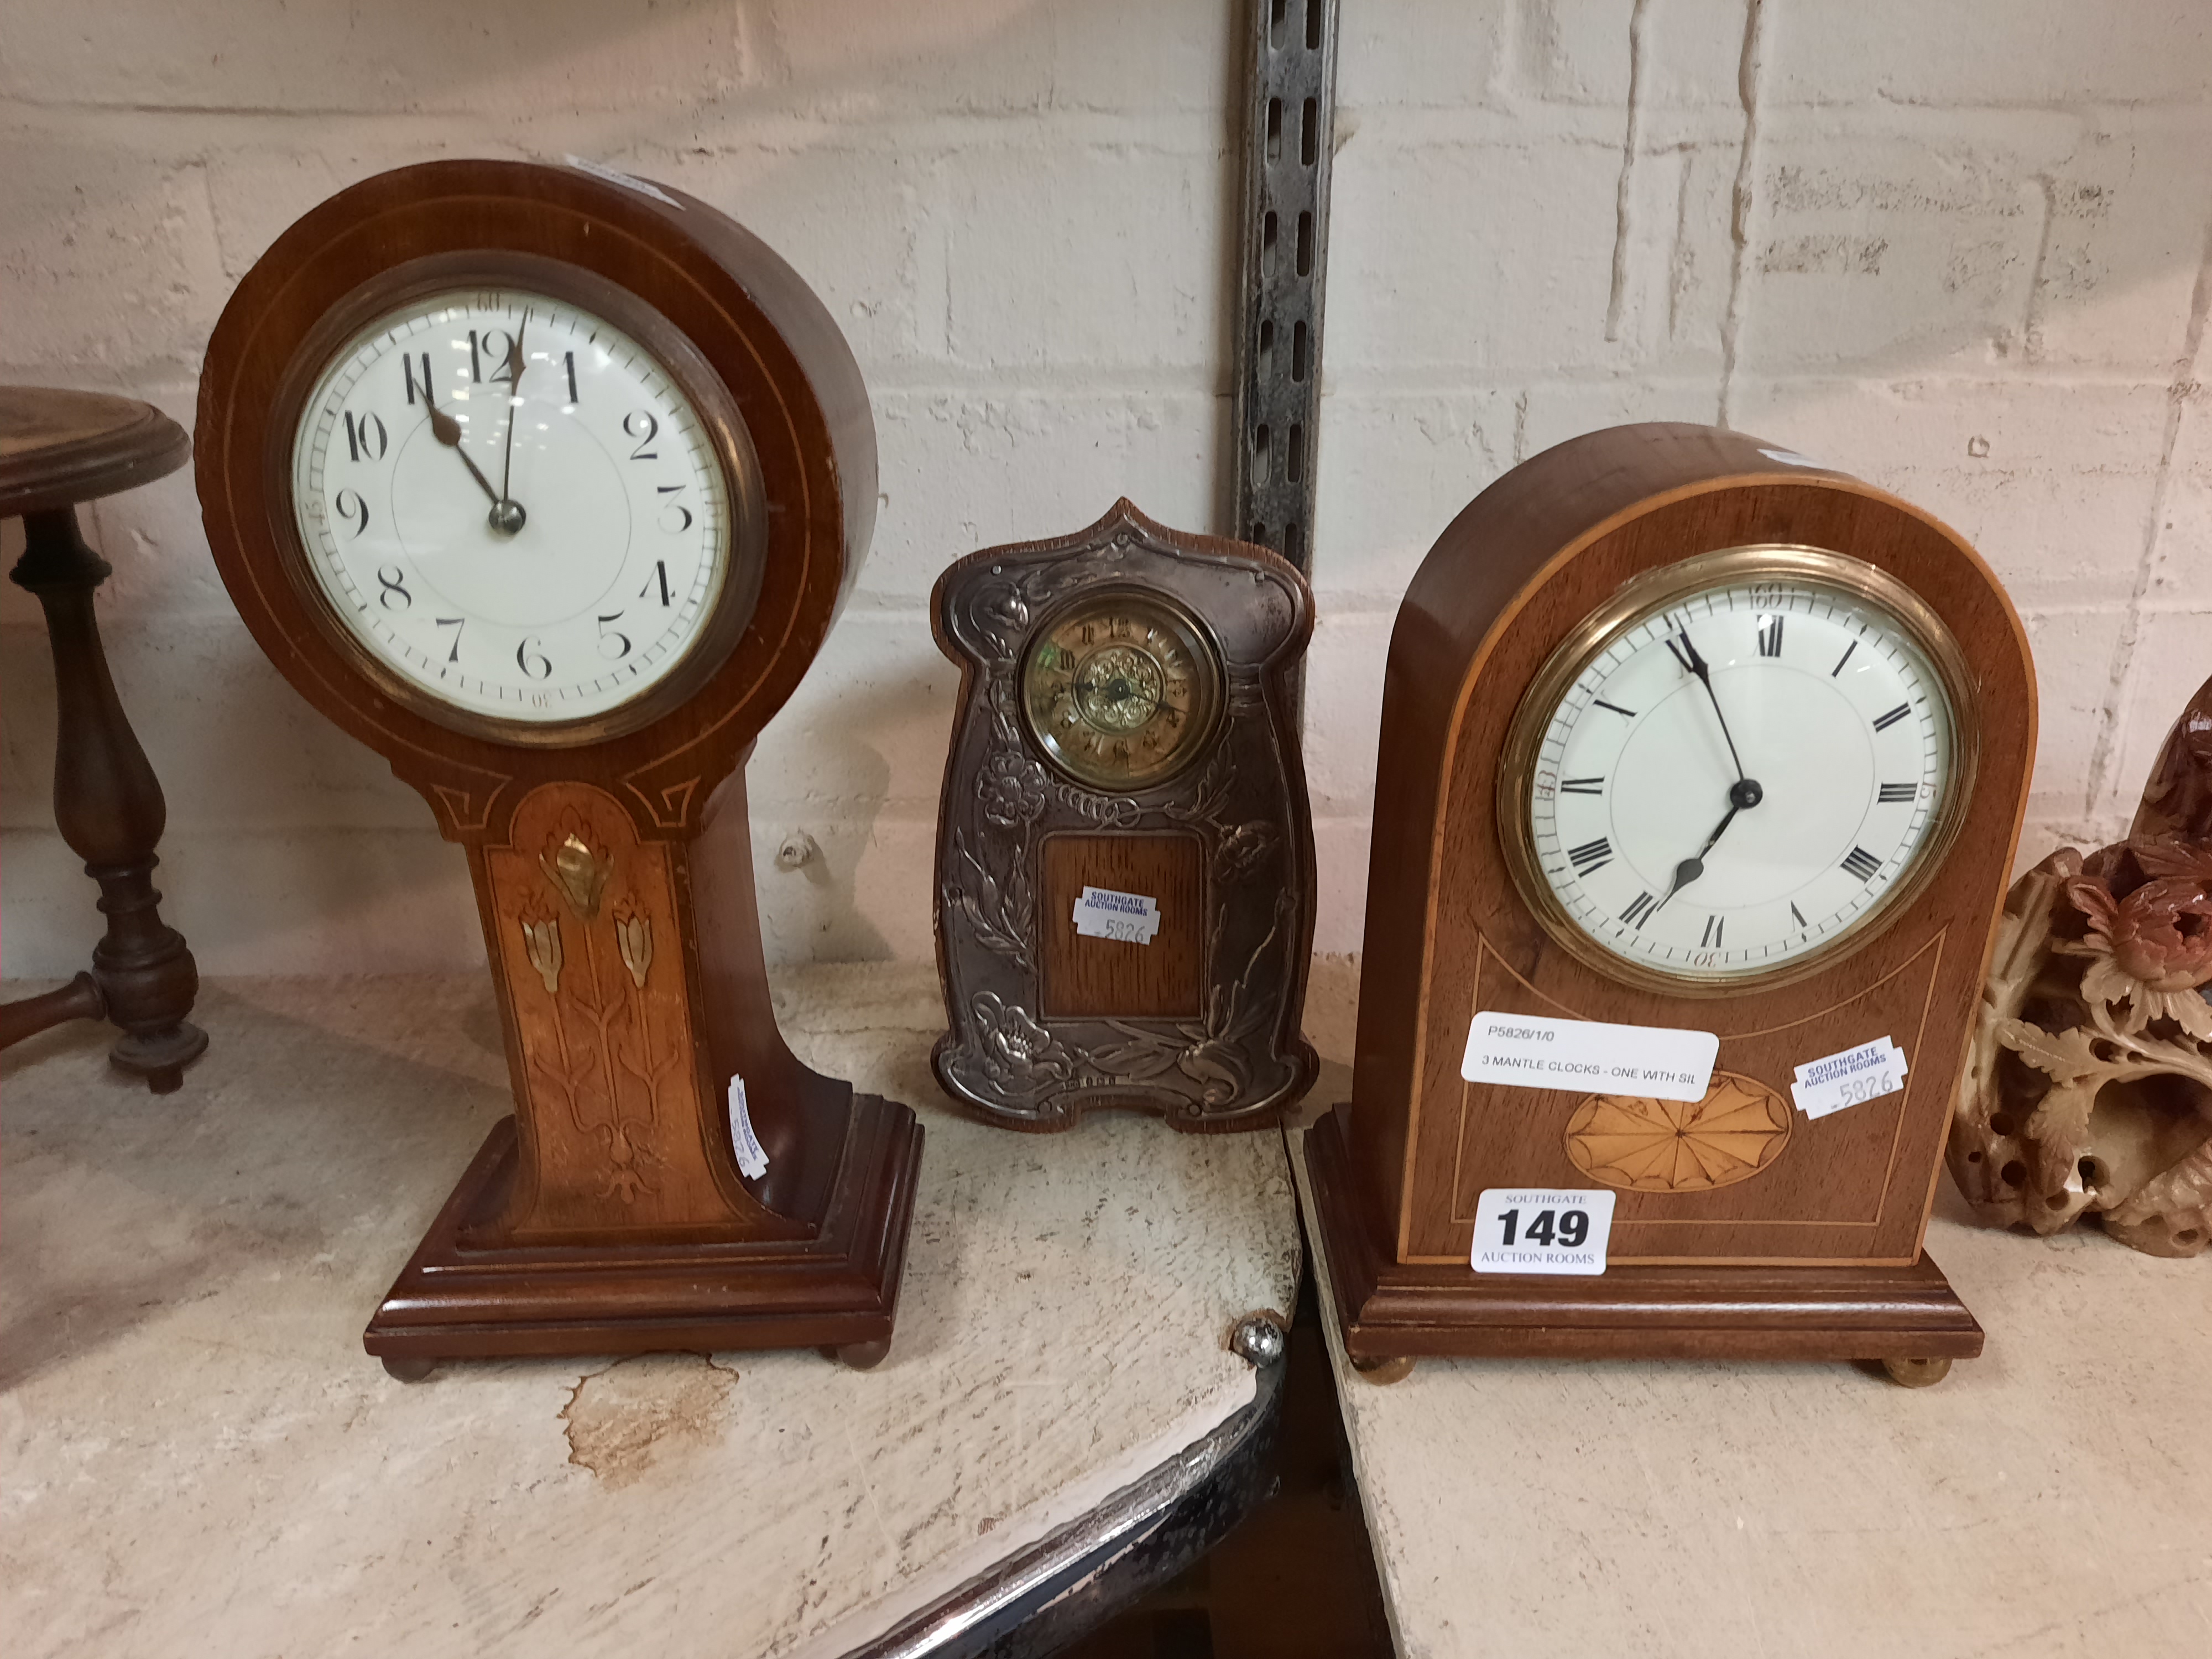 3 MANTLE CLOCKS - ONE WITH SILVER FRONT